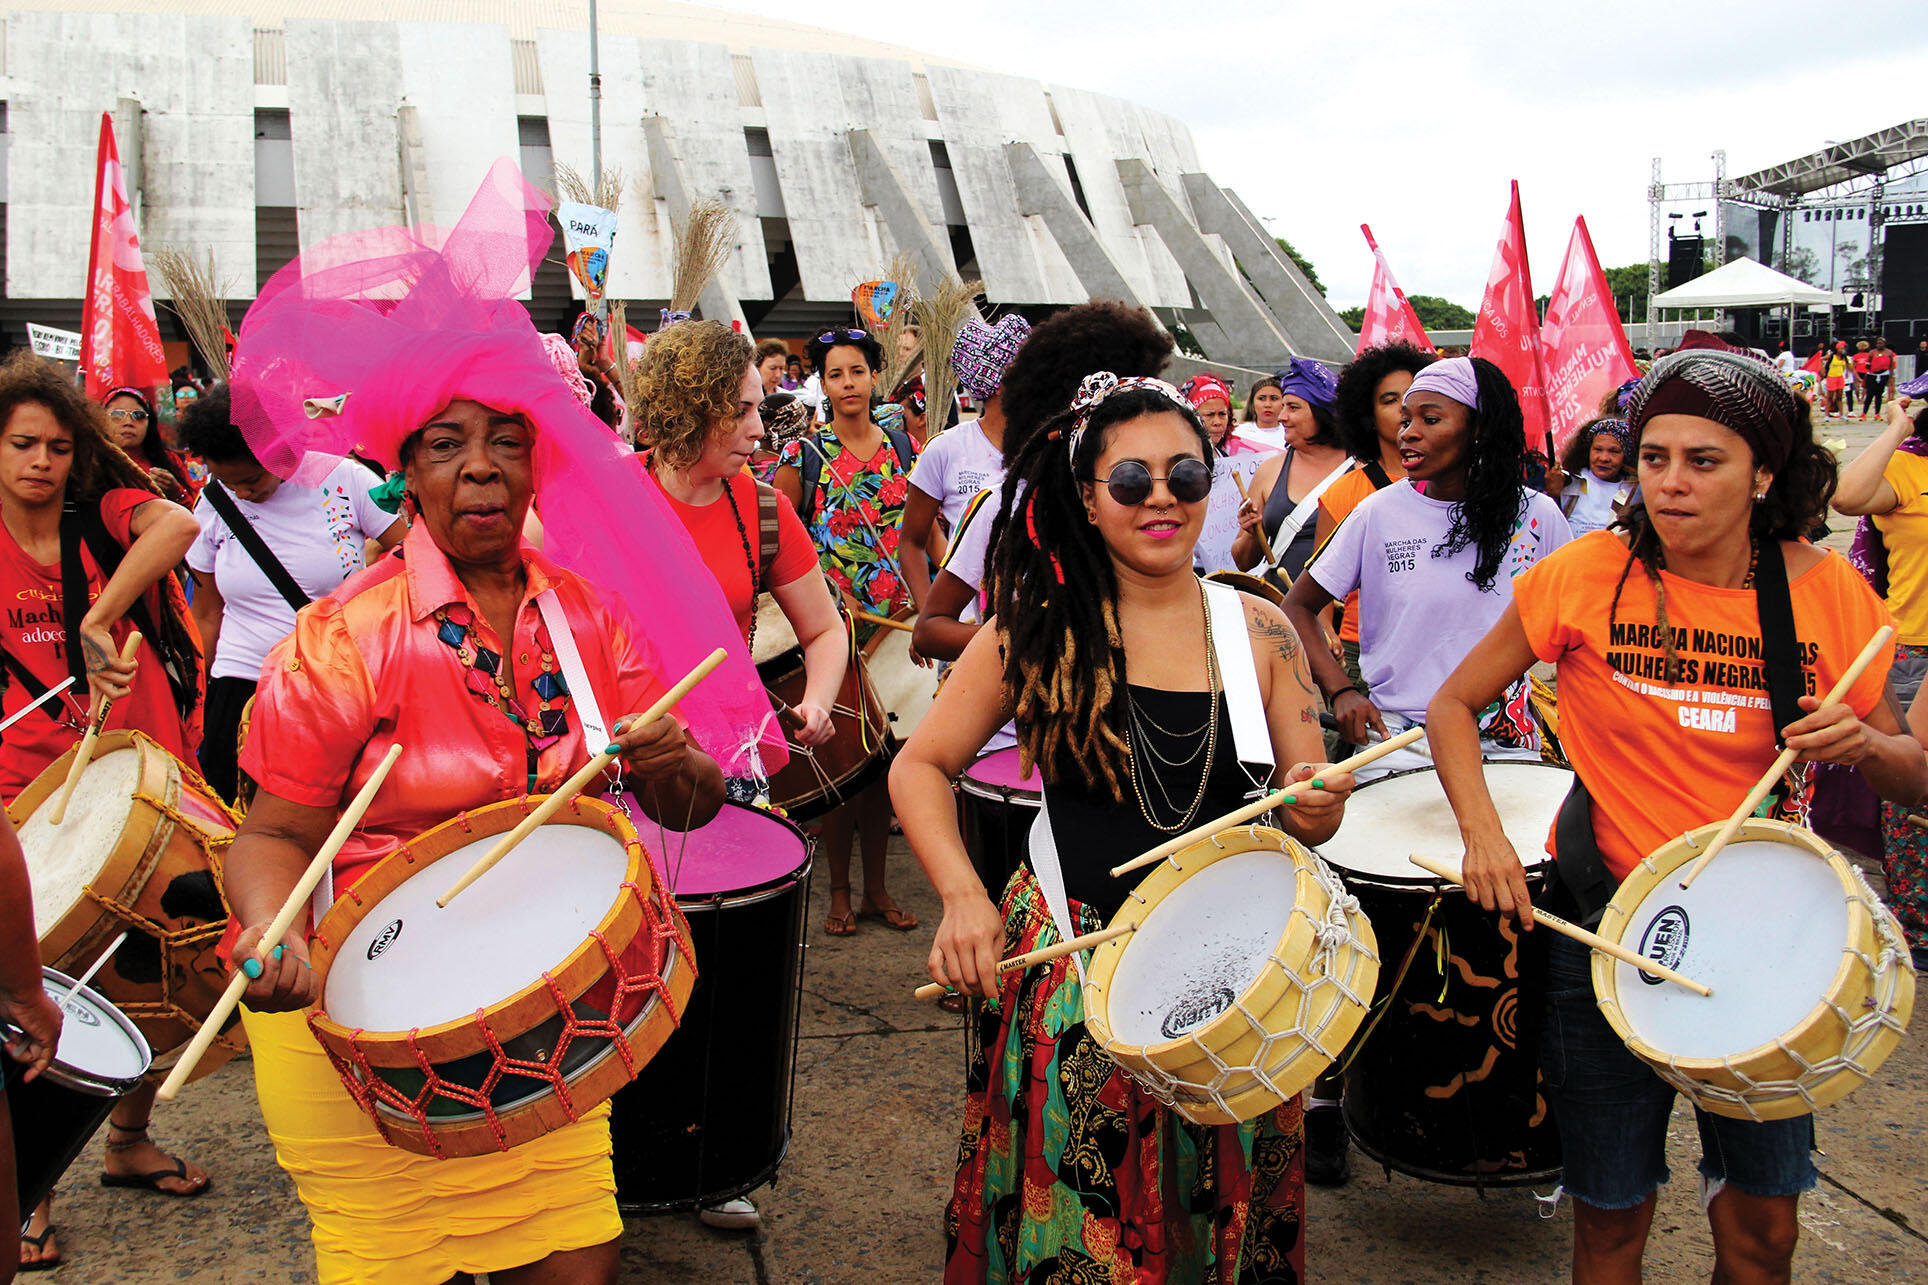 A group of colorfully dressed drummers in Brazil’s National March of Black Women Against Racism, Violence, and for the Good Life, October 2015. (Photo courtesy of UN Women.)